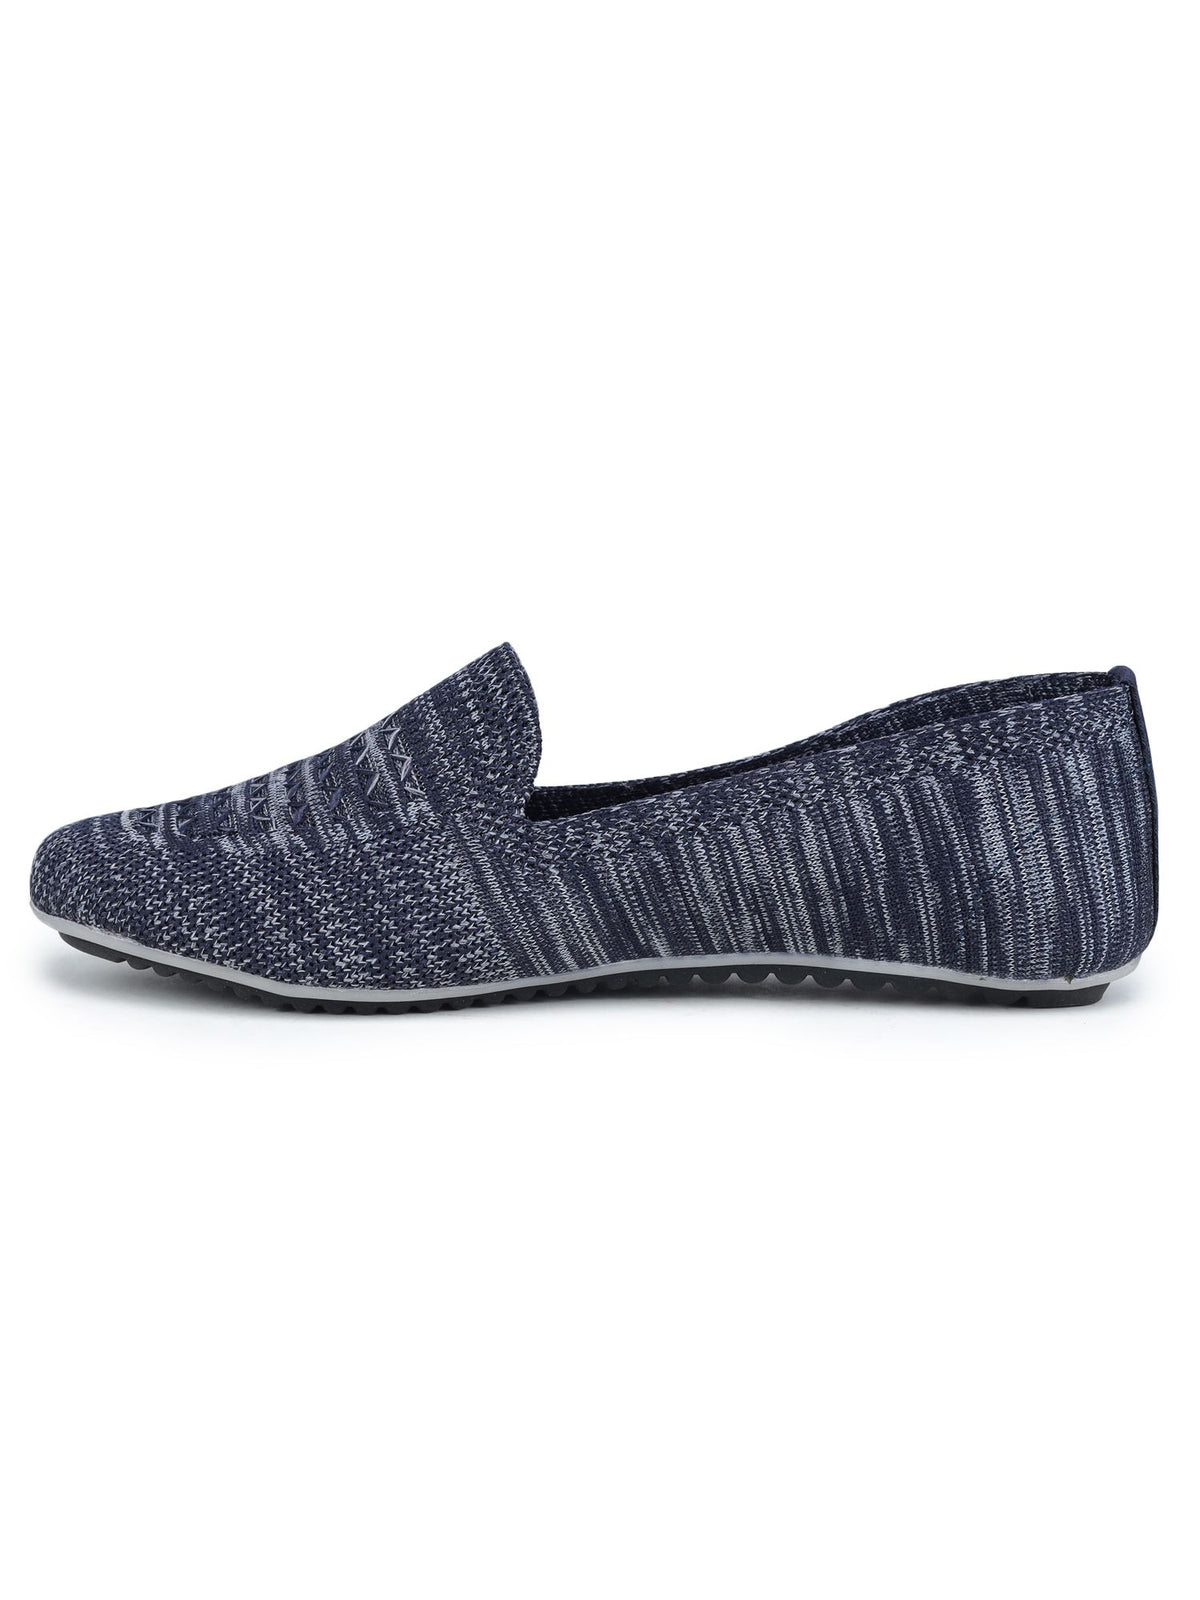 Blue Solid Textile Slip On Casual Bellies for Women